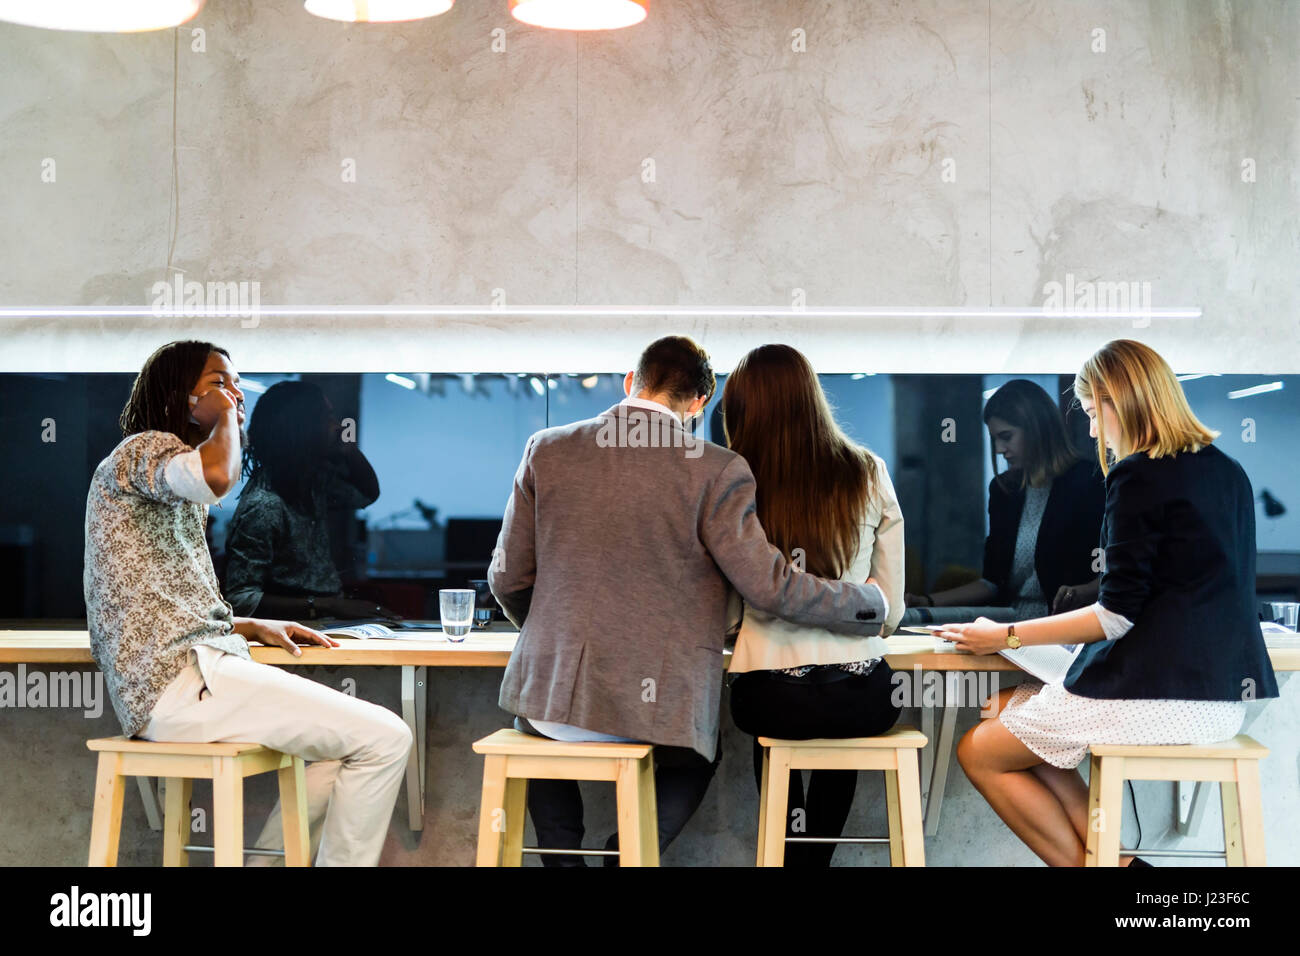 Group of people having a break from work in the cafeteria Stock Photo